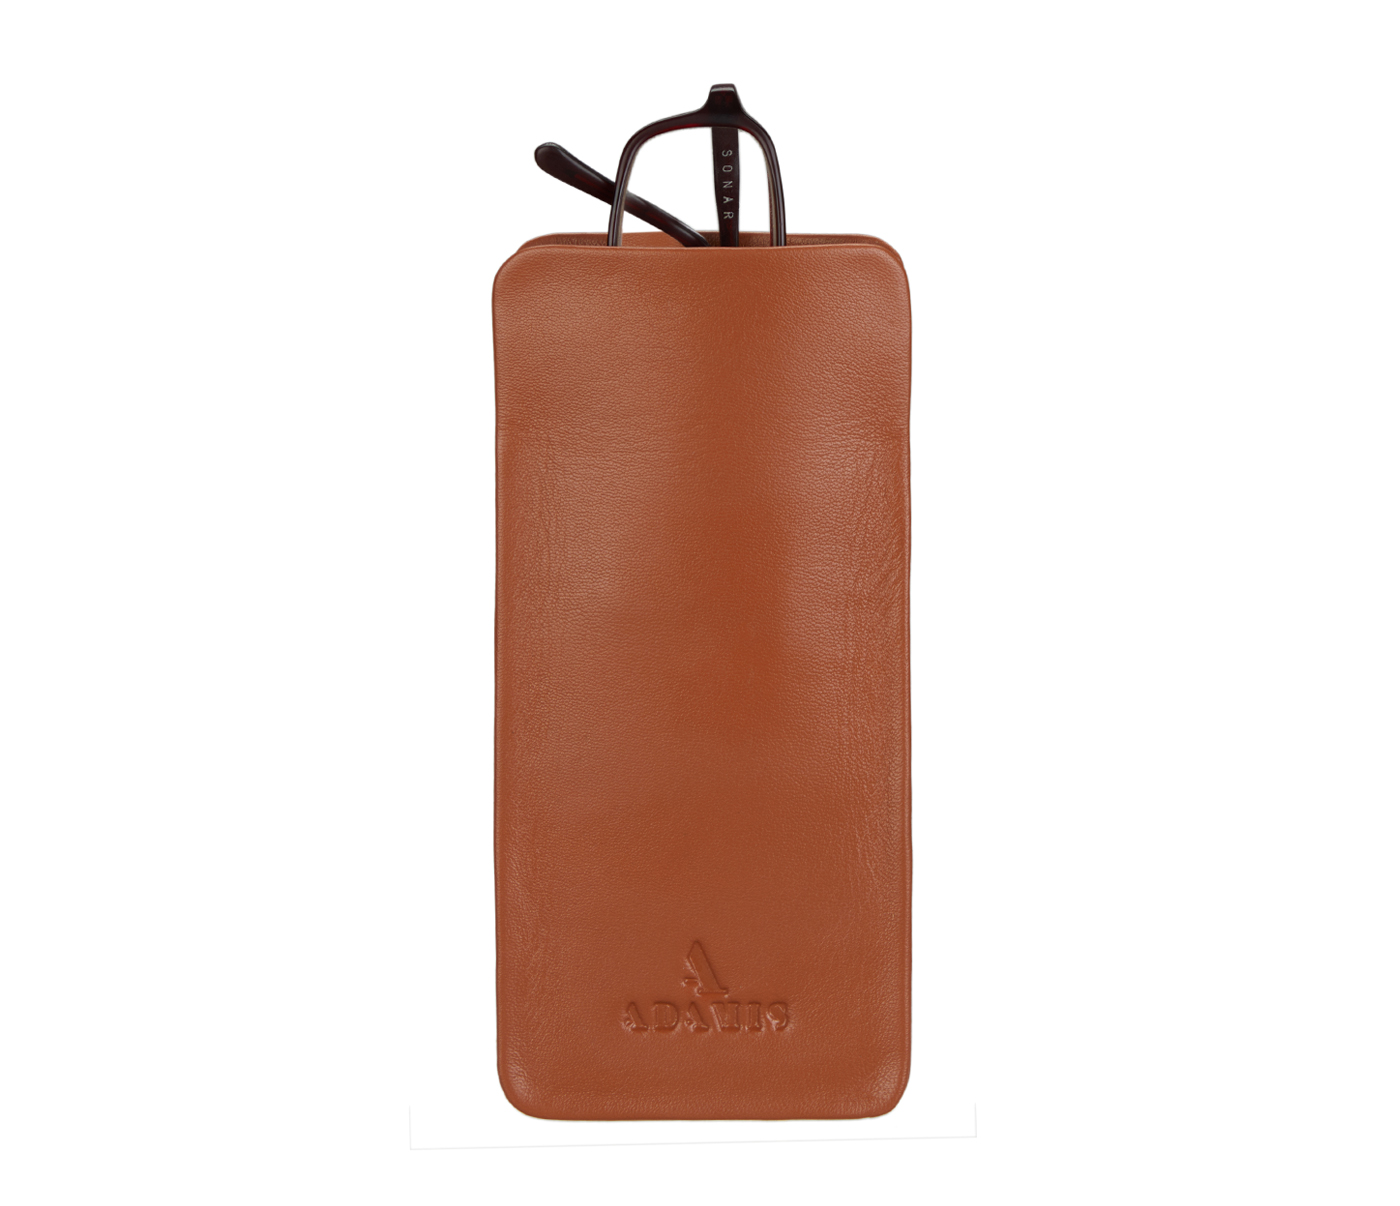 VW11--Soft stitch free spectacle case in Genuine Leather - Tan